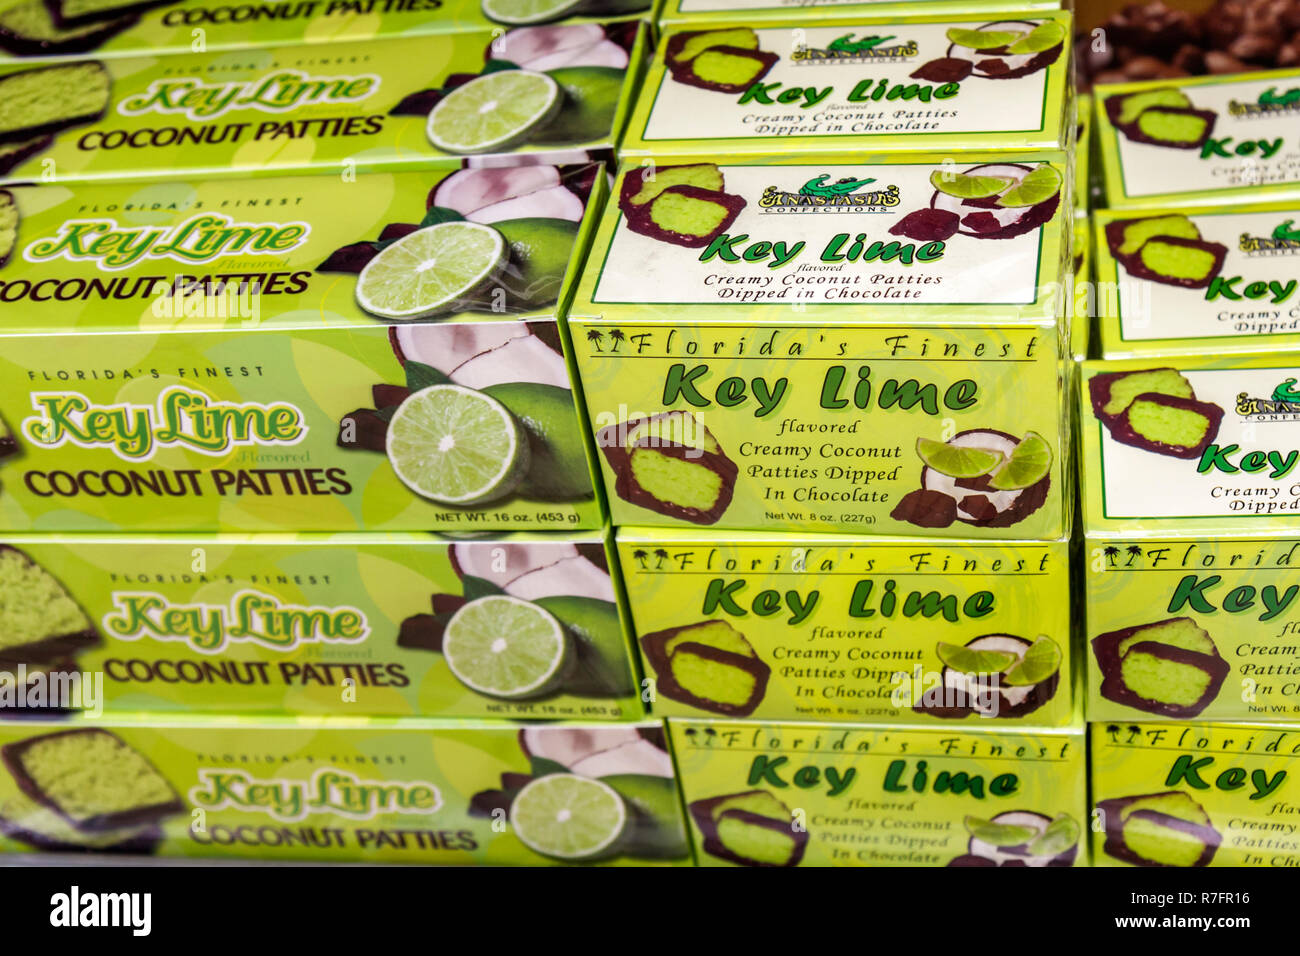 Miami Florida,Davie,Bob Roth's New River Groves,roadside fruit stand,local products,key lime coconut patties,candy confection,chocolate dipped,boxes p Stock Photo